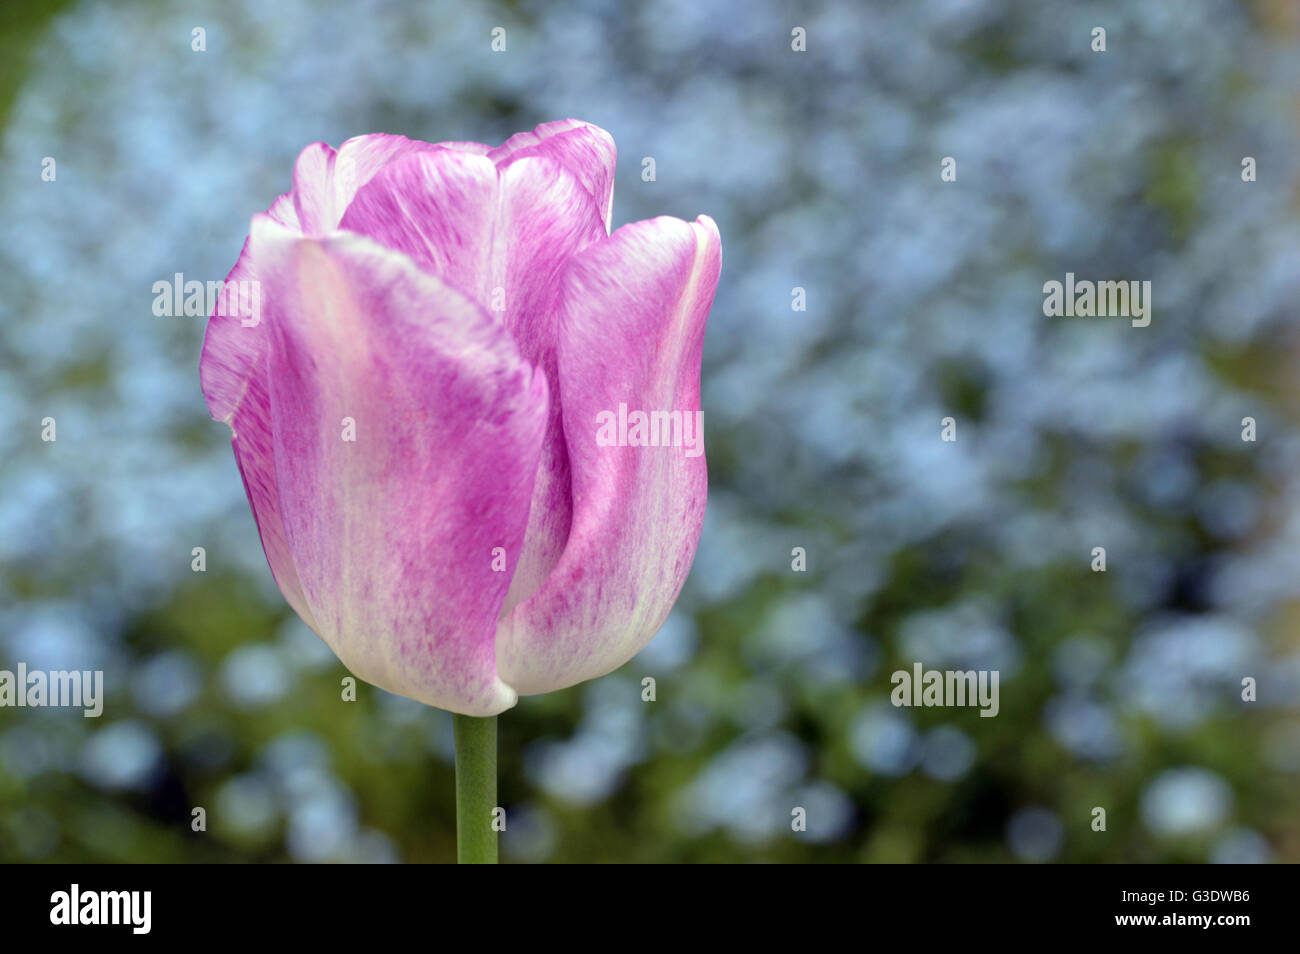 Single Shirley Tulip Flower Head on Floral Background Stock Photo